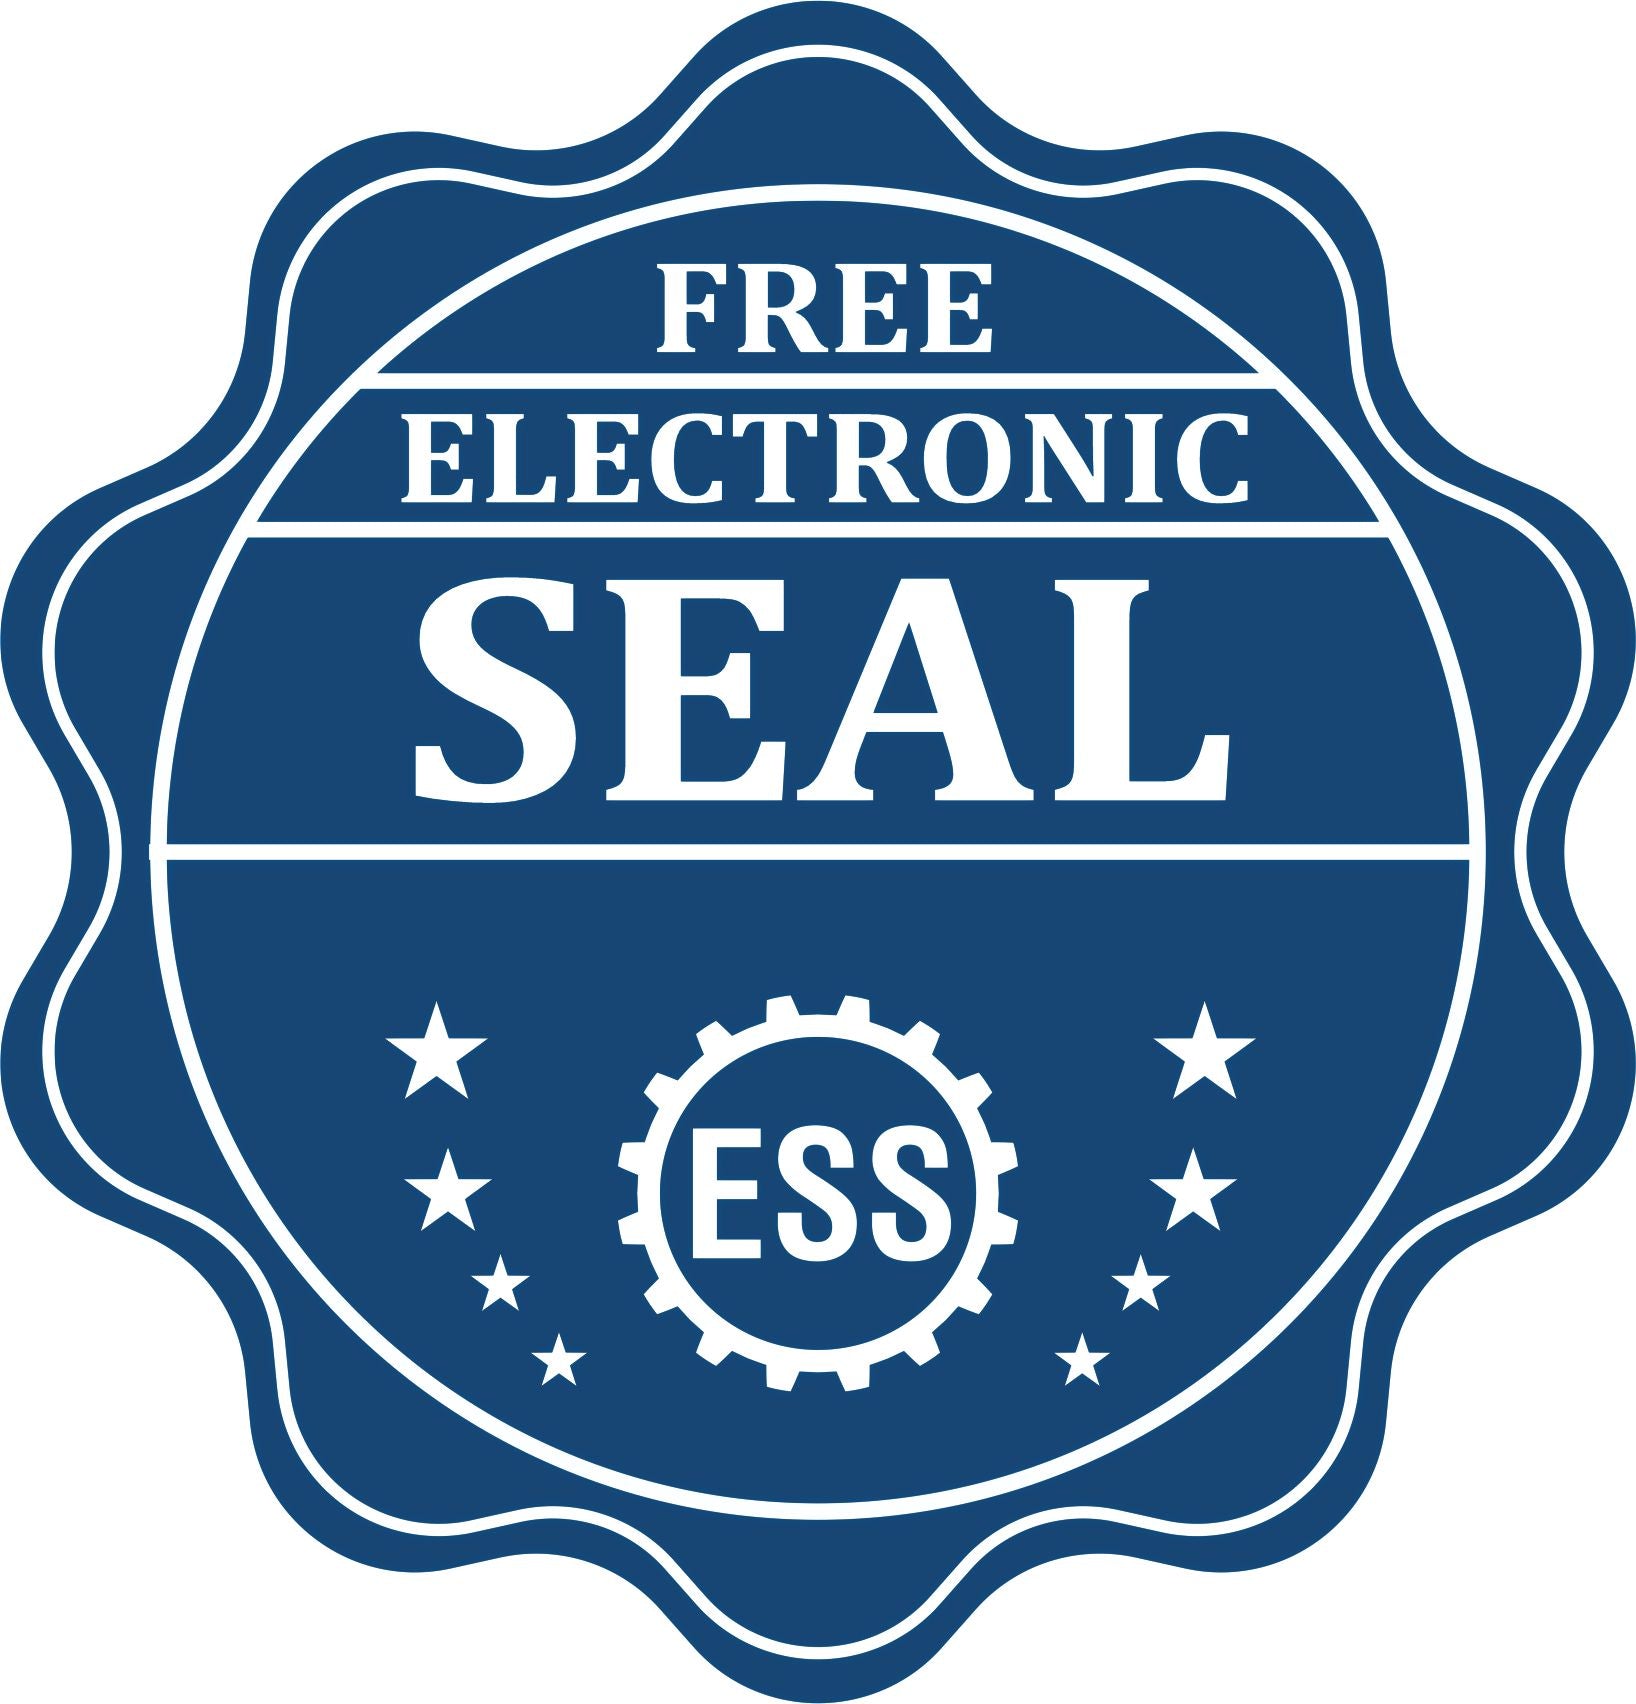 A badge showing a free electronic seal for the PSI South Dakota Notary Stamp with stars and the ESS gear on the emblem.